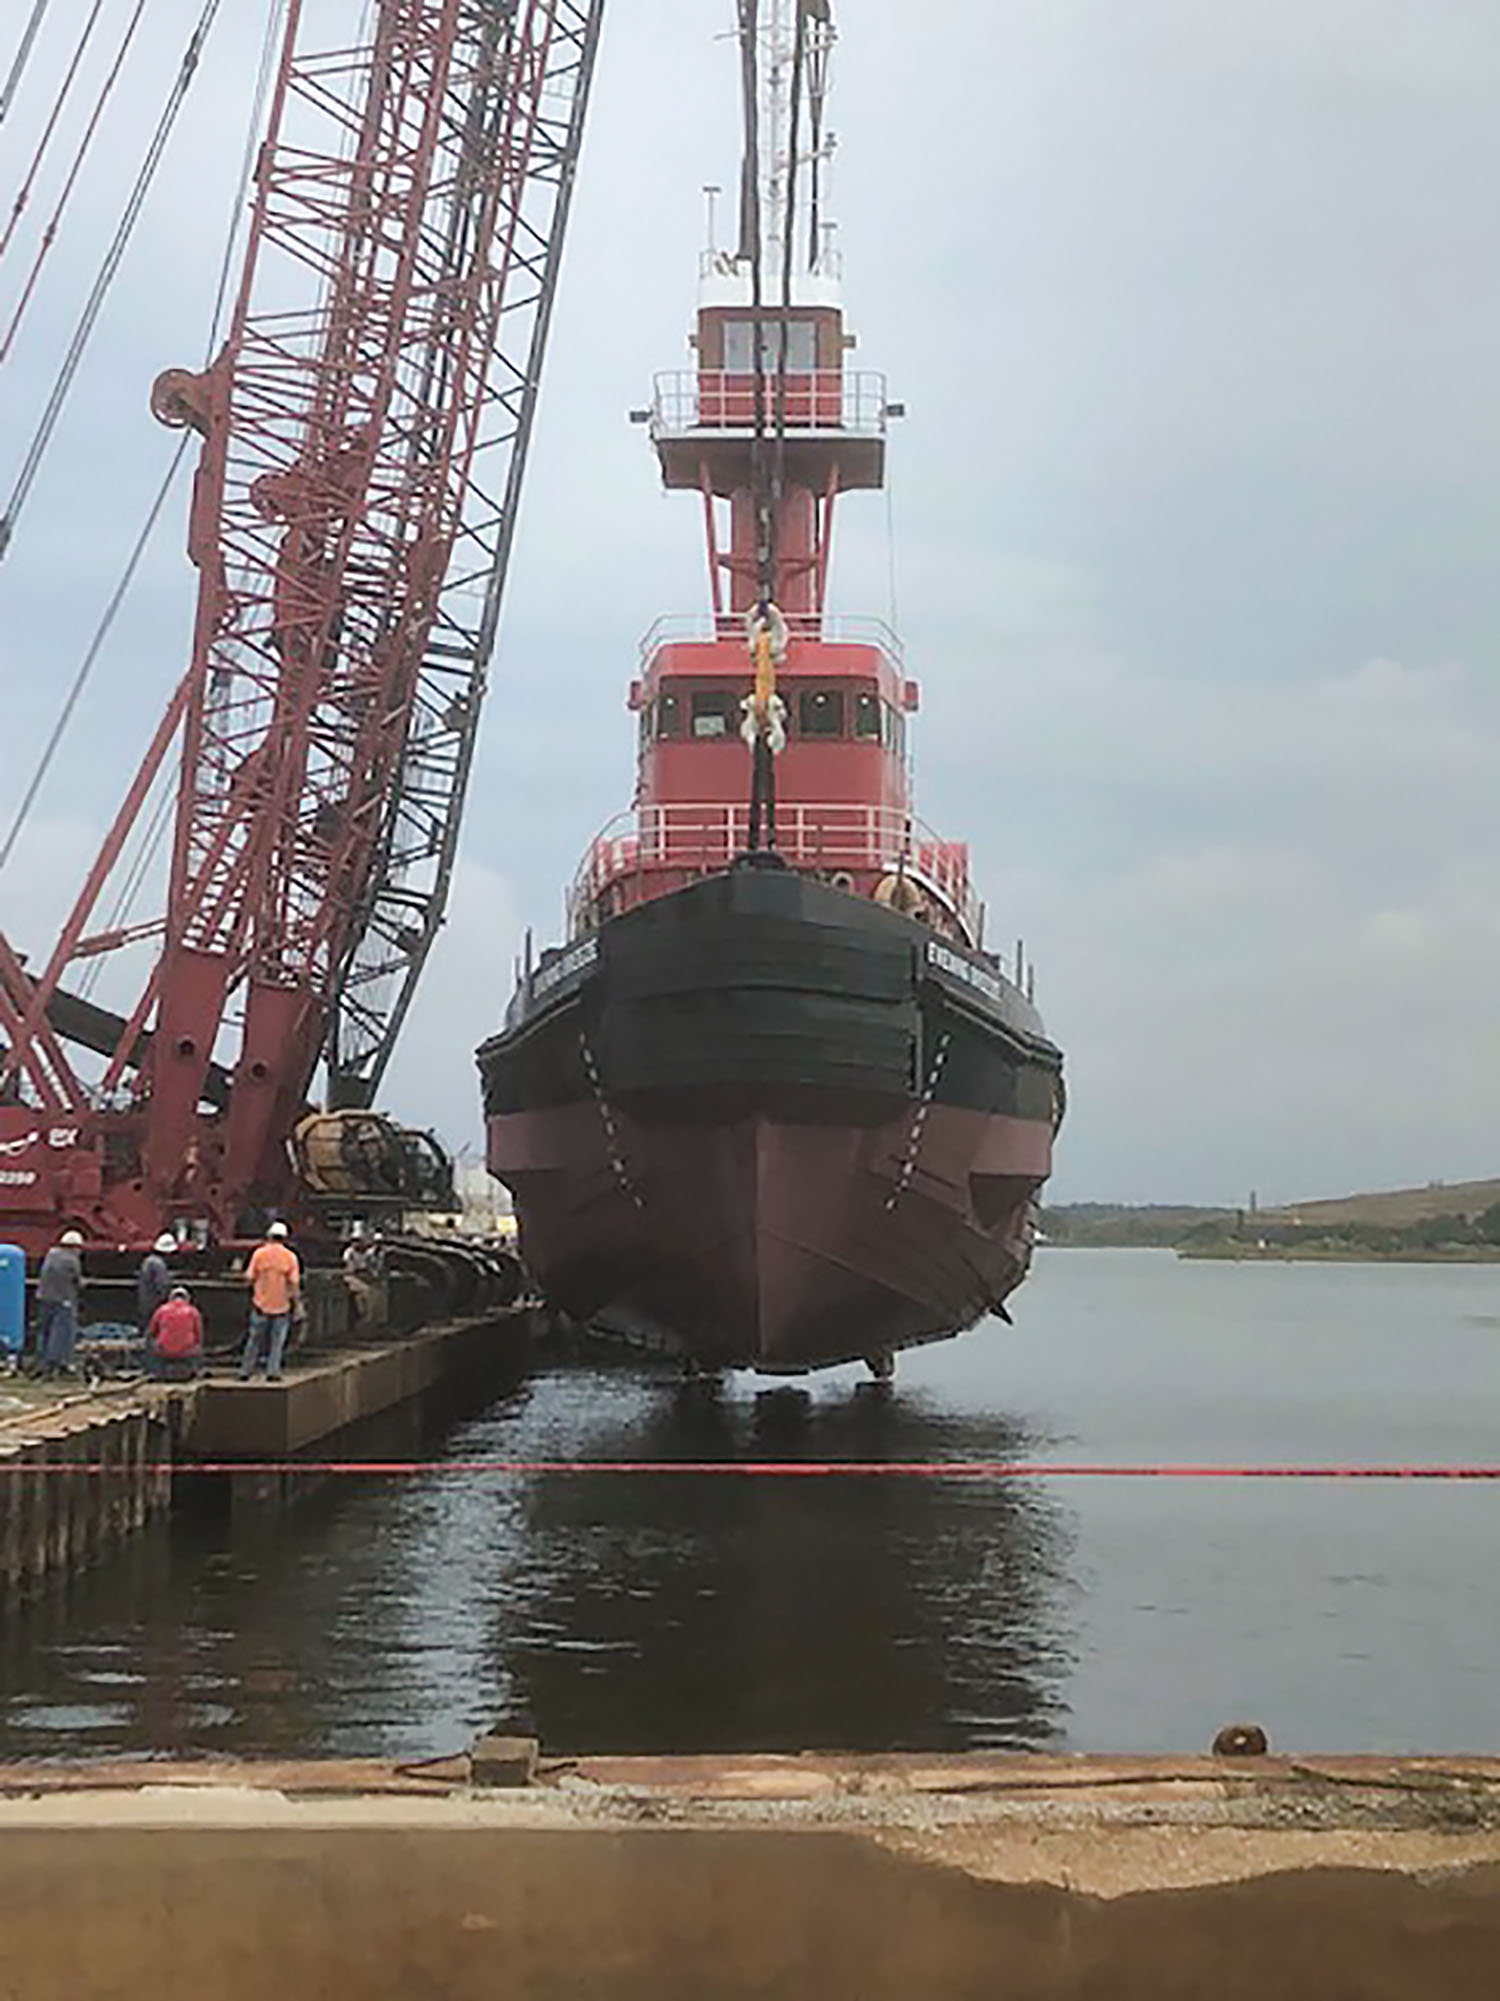 The ATB tug mv. Evening Breeze will be paired with the barge B. No. 252, which is currently under construction at Bollinger Shipyards. (Photo courtesy of Bouchard Transportation) 